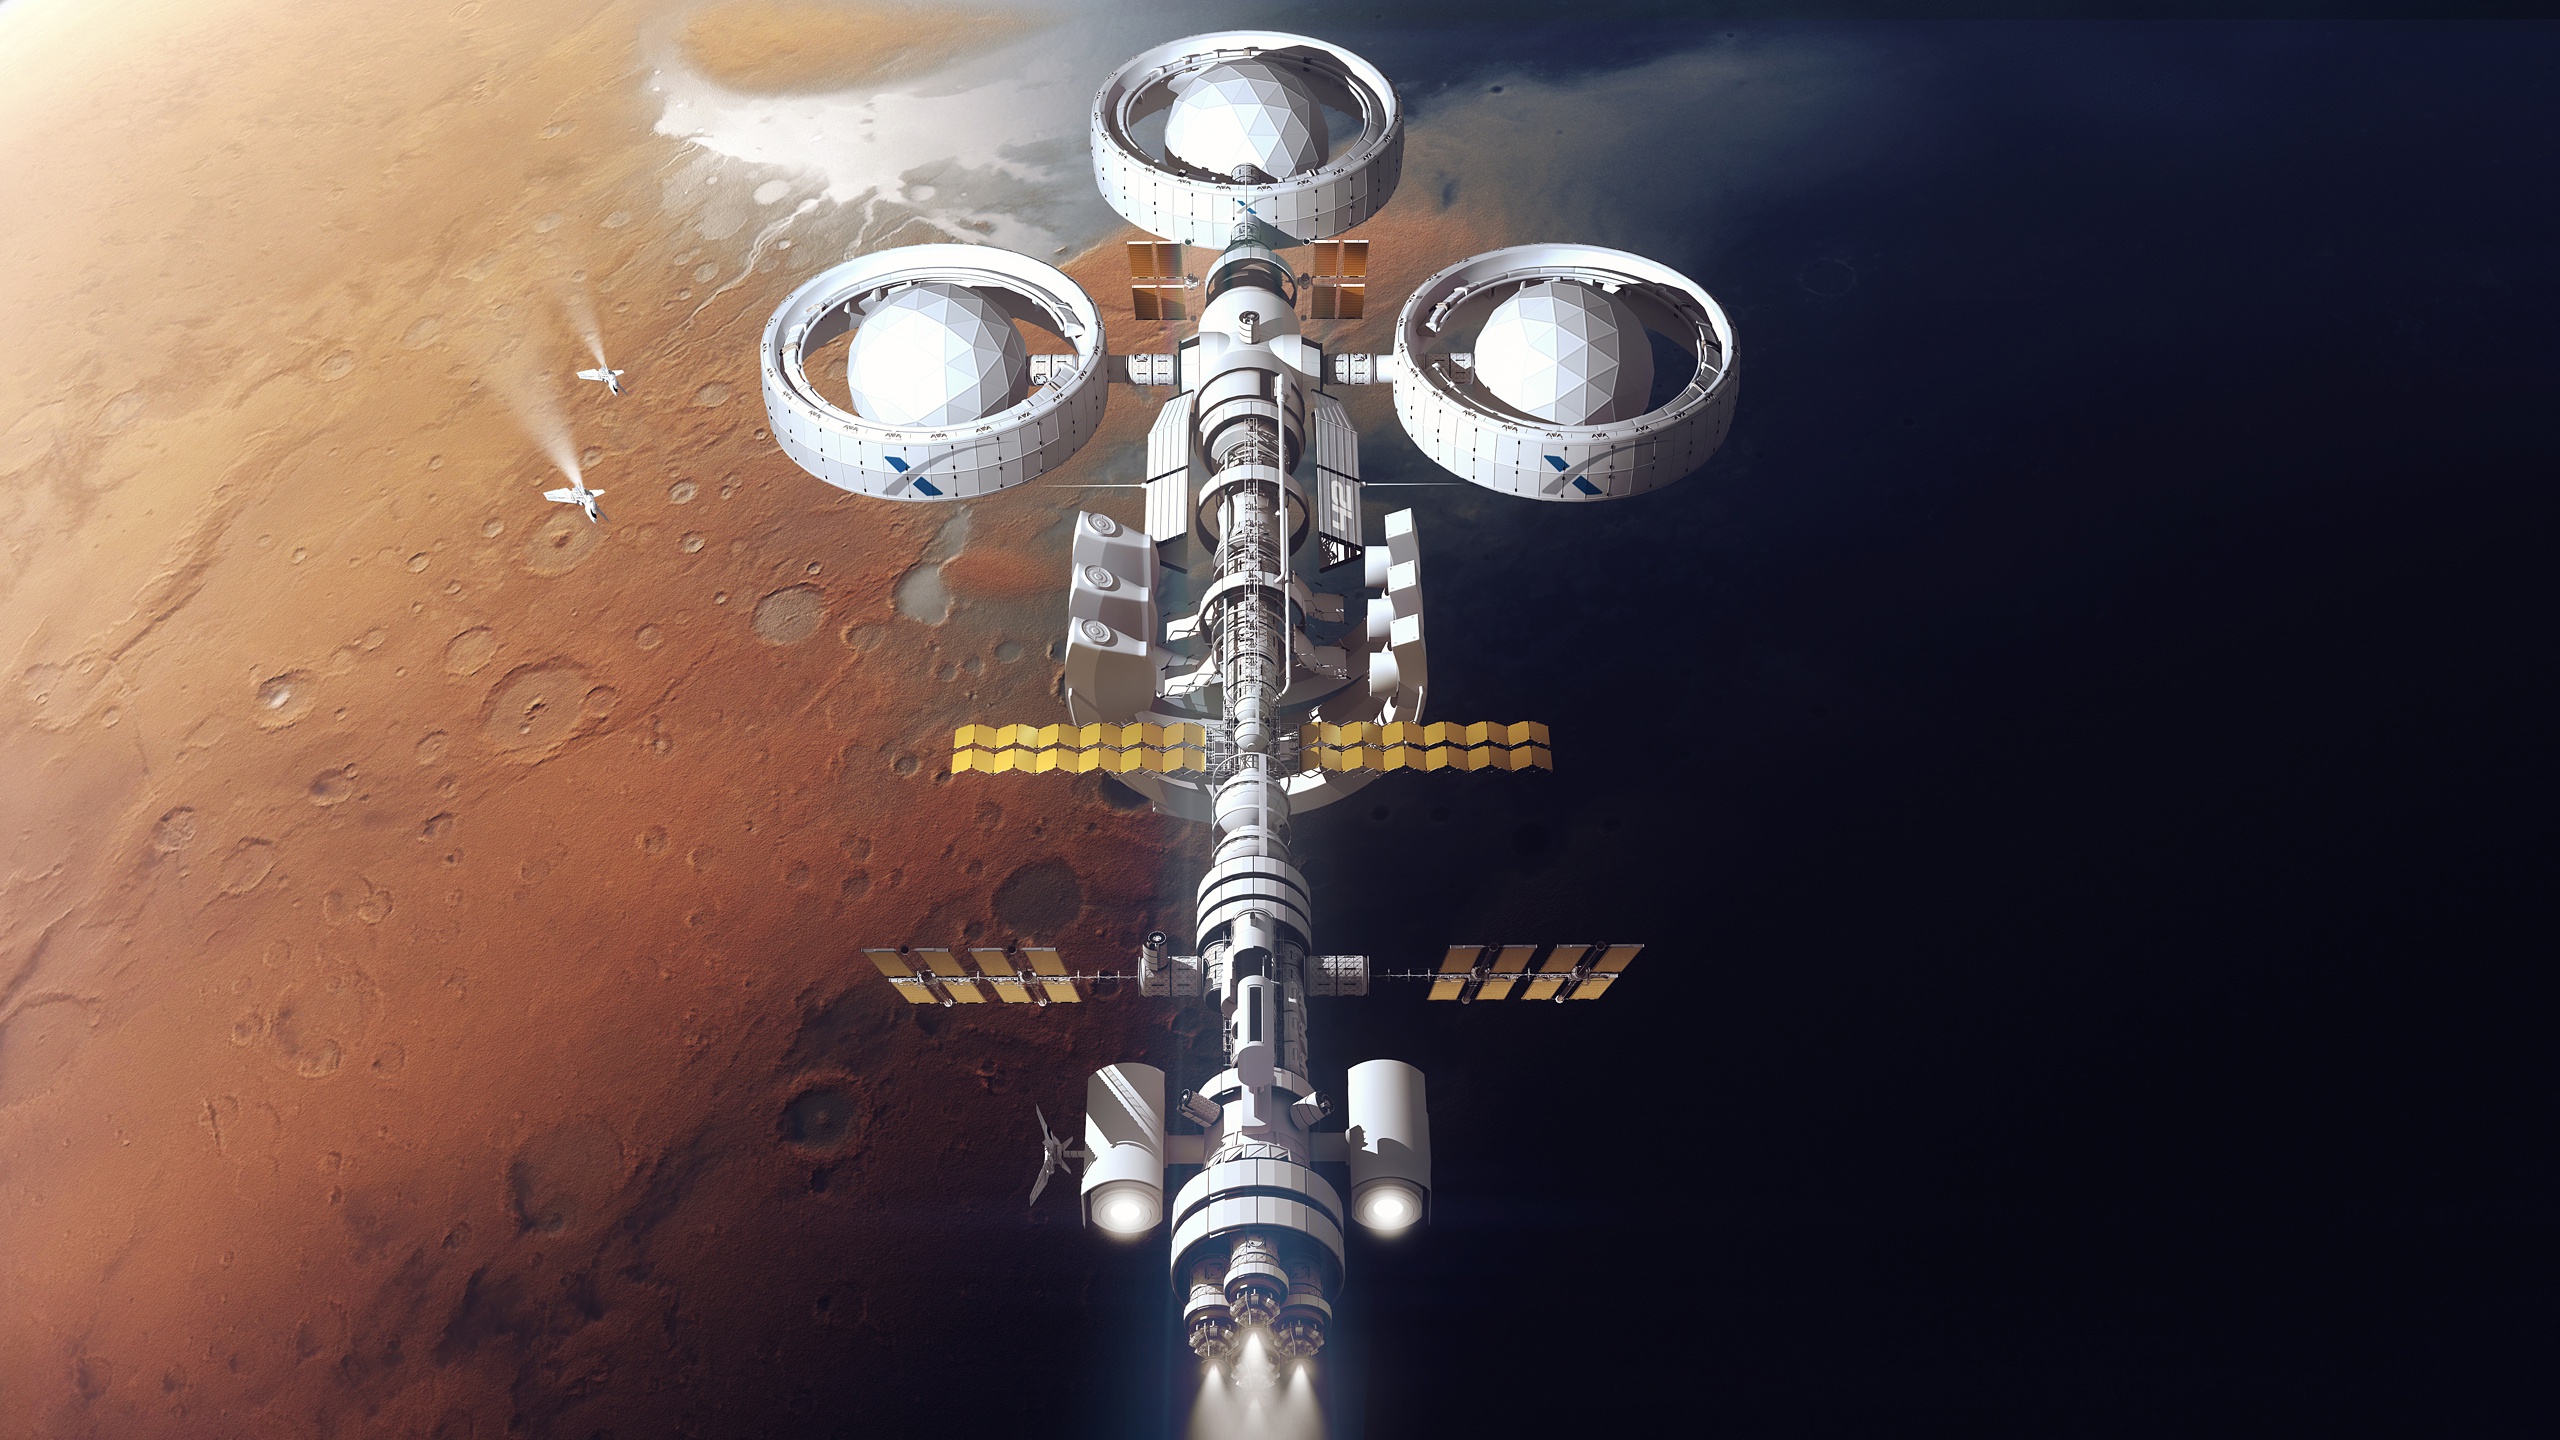 General 2560x1440 space station space planet science fiction digital art